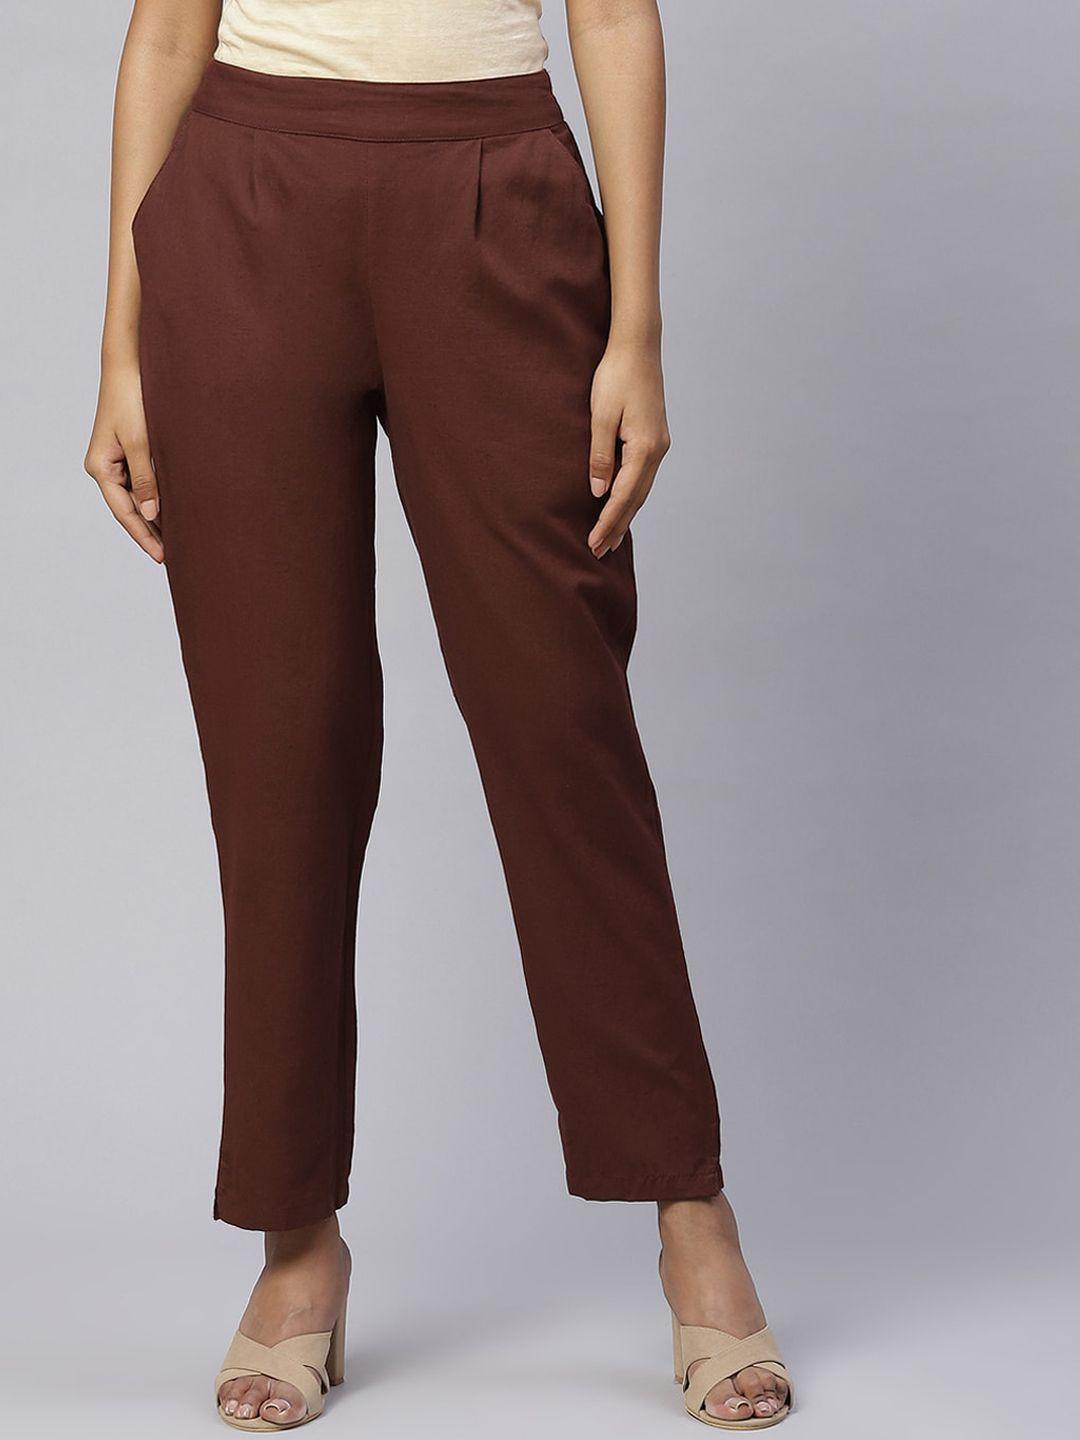 iridaa jaipur women cotton flax solid straight brown pleated trousers